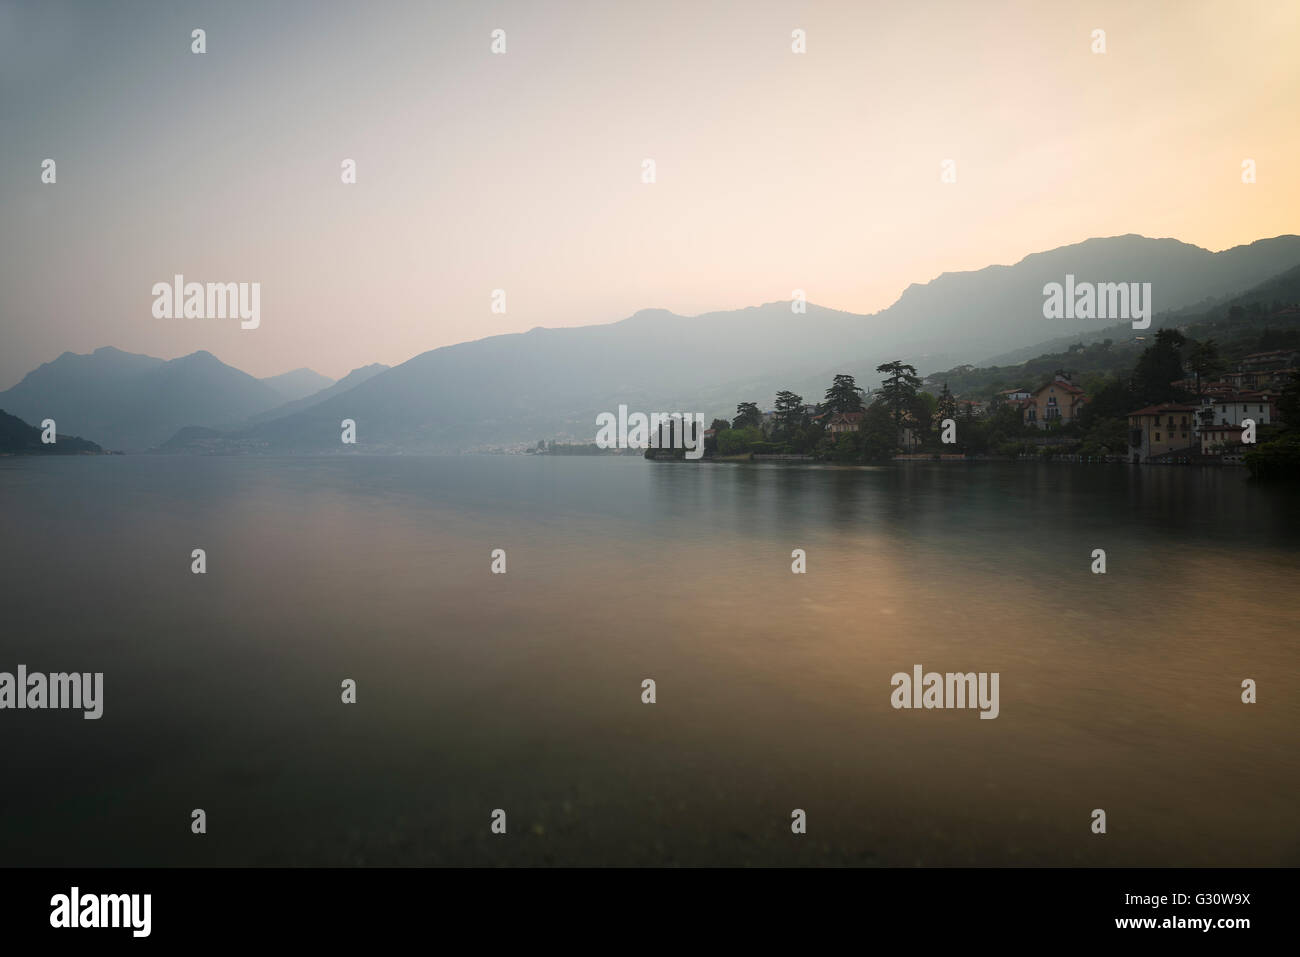 Panorama of scenery with mountains and villages at Lake Iseo at dawn shortly before golden sunrise,Sulzano,Lombardy,Italy Stock Photo